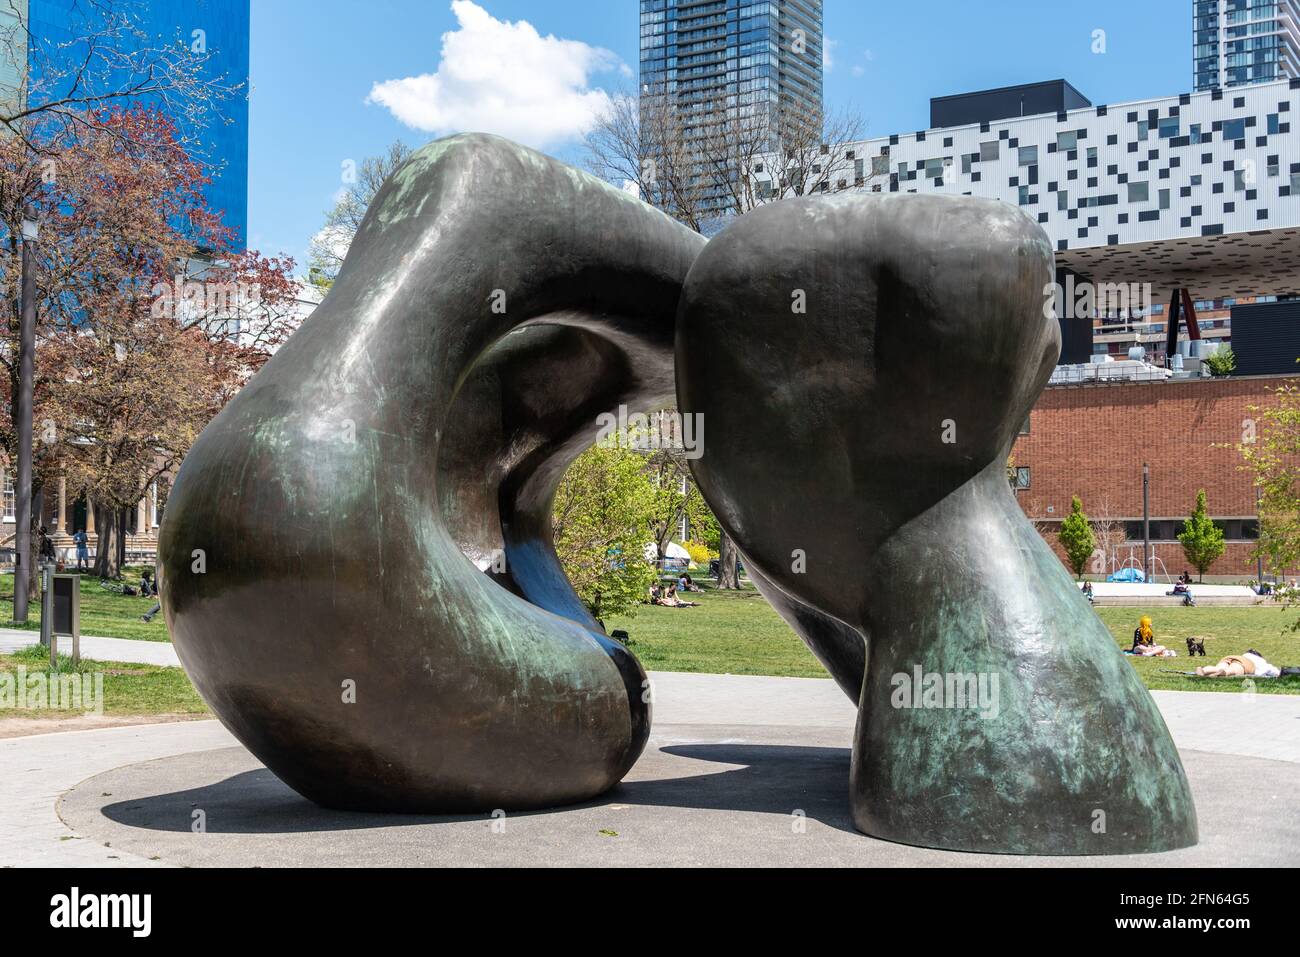 The sculpture named 'Large Two Forms' by Henry Moore. It is located in The Grange Park behind the Art Gallery of Ontario (AGO) in Toronto, Canada Stock Photo